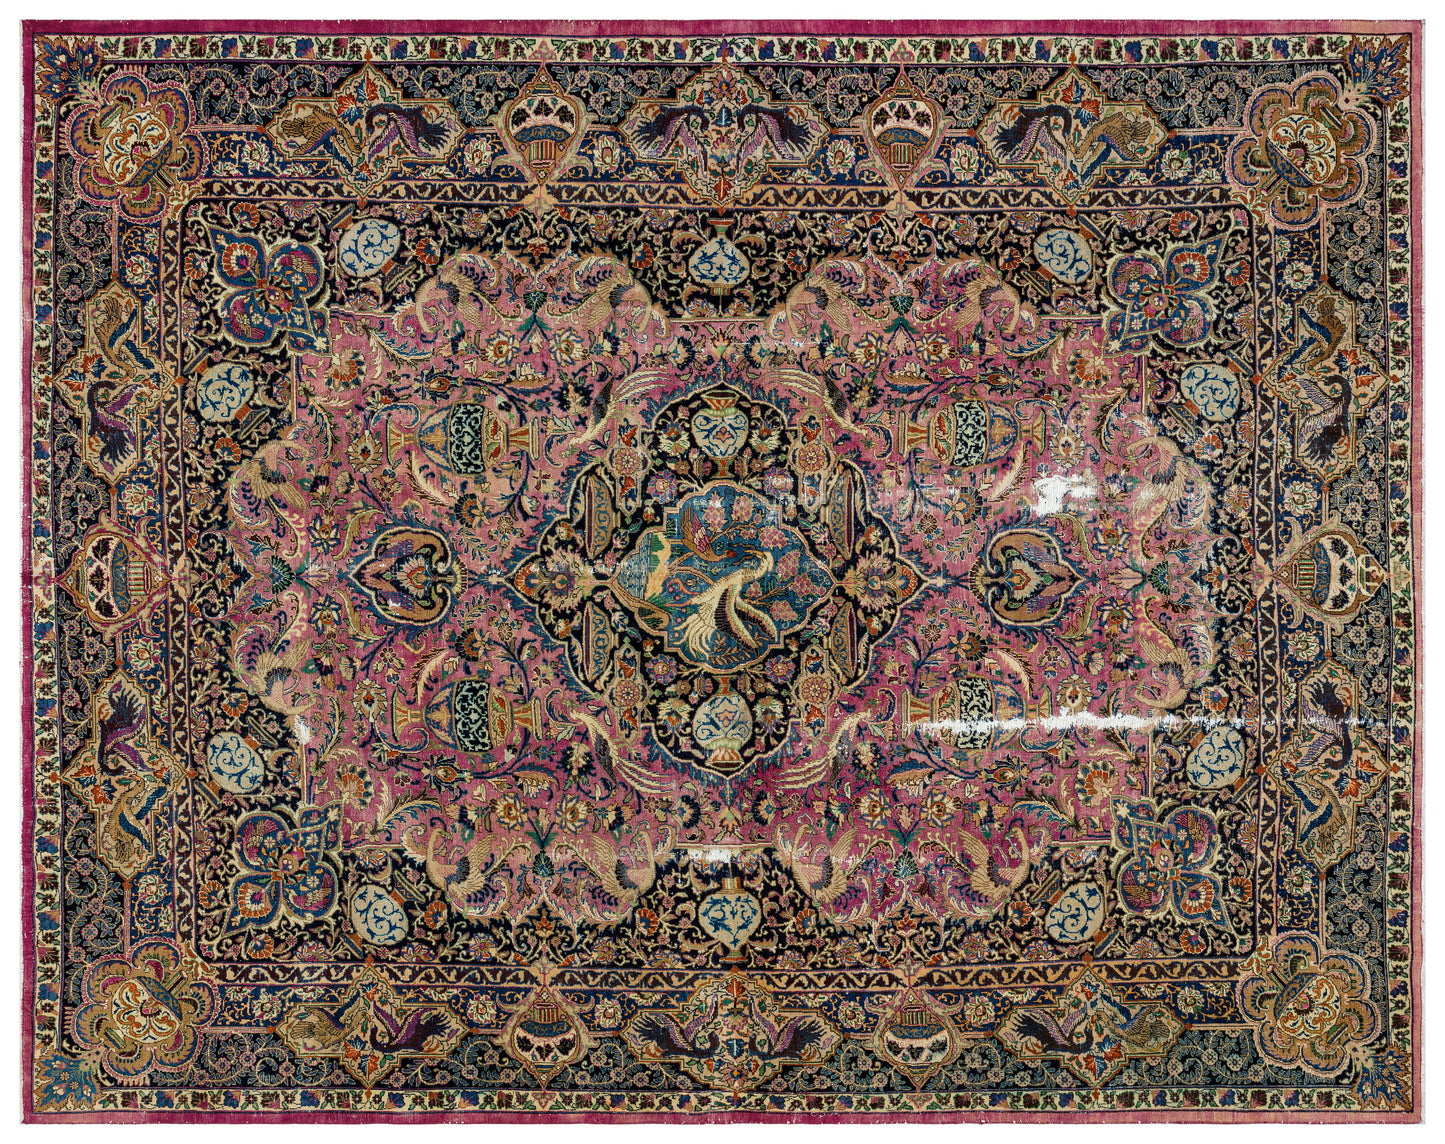 Vintage Rugs by Piginda: Timeless Beauty for Your Home,10'0" x 12'3"